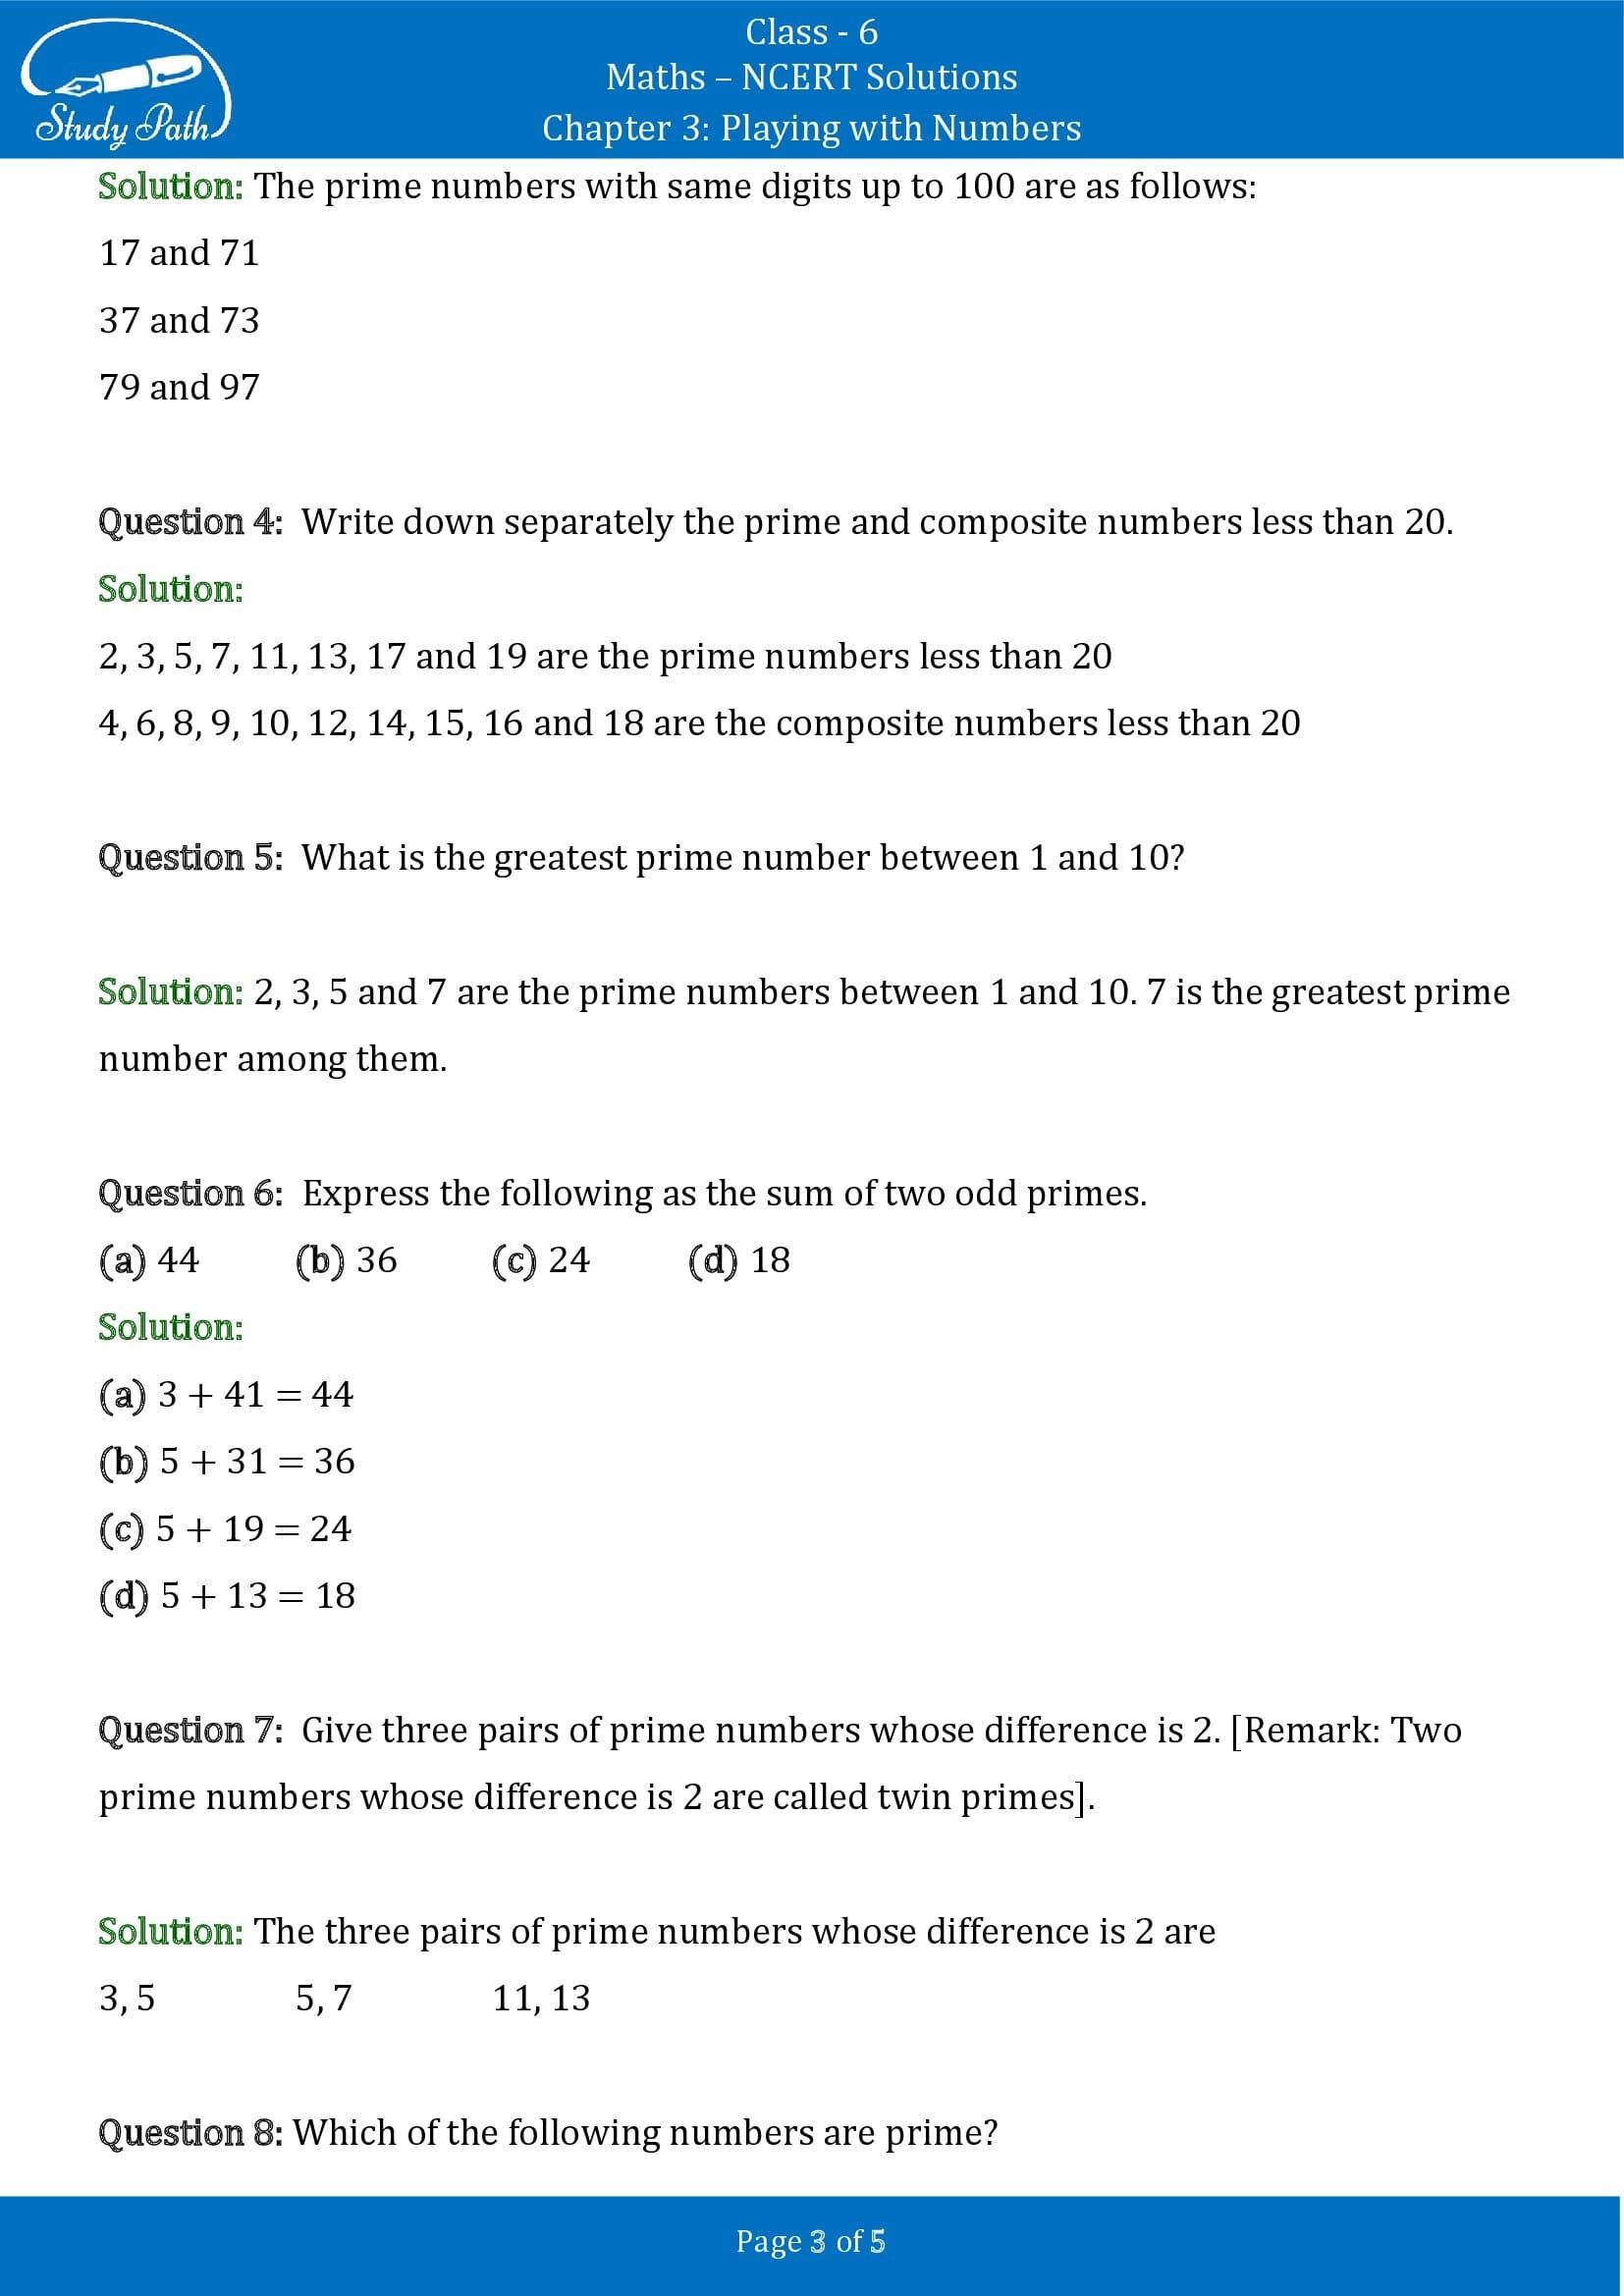 NCERT Solutions for Class 6 Maths Chapter 3 Playing with Numbers Exercise 3.2 00003